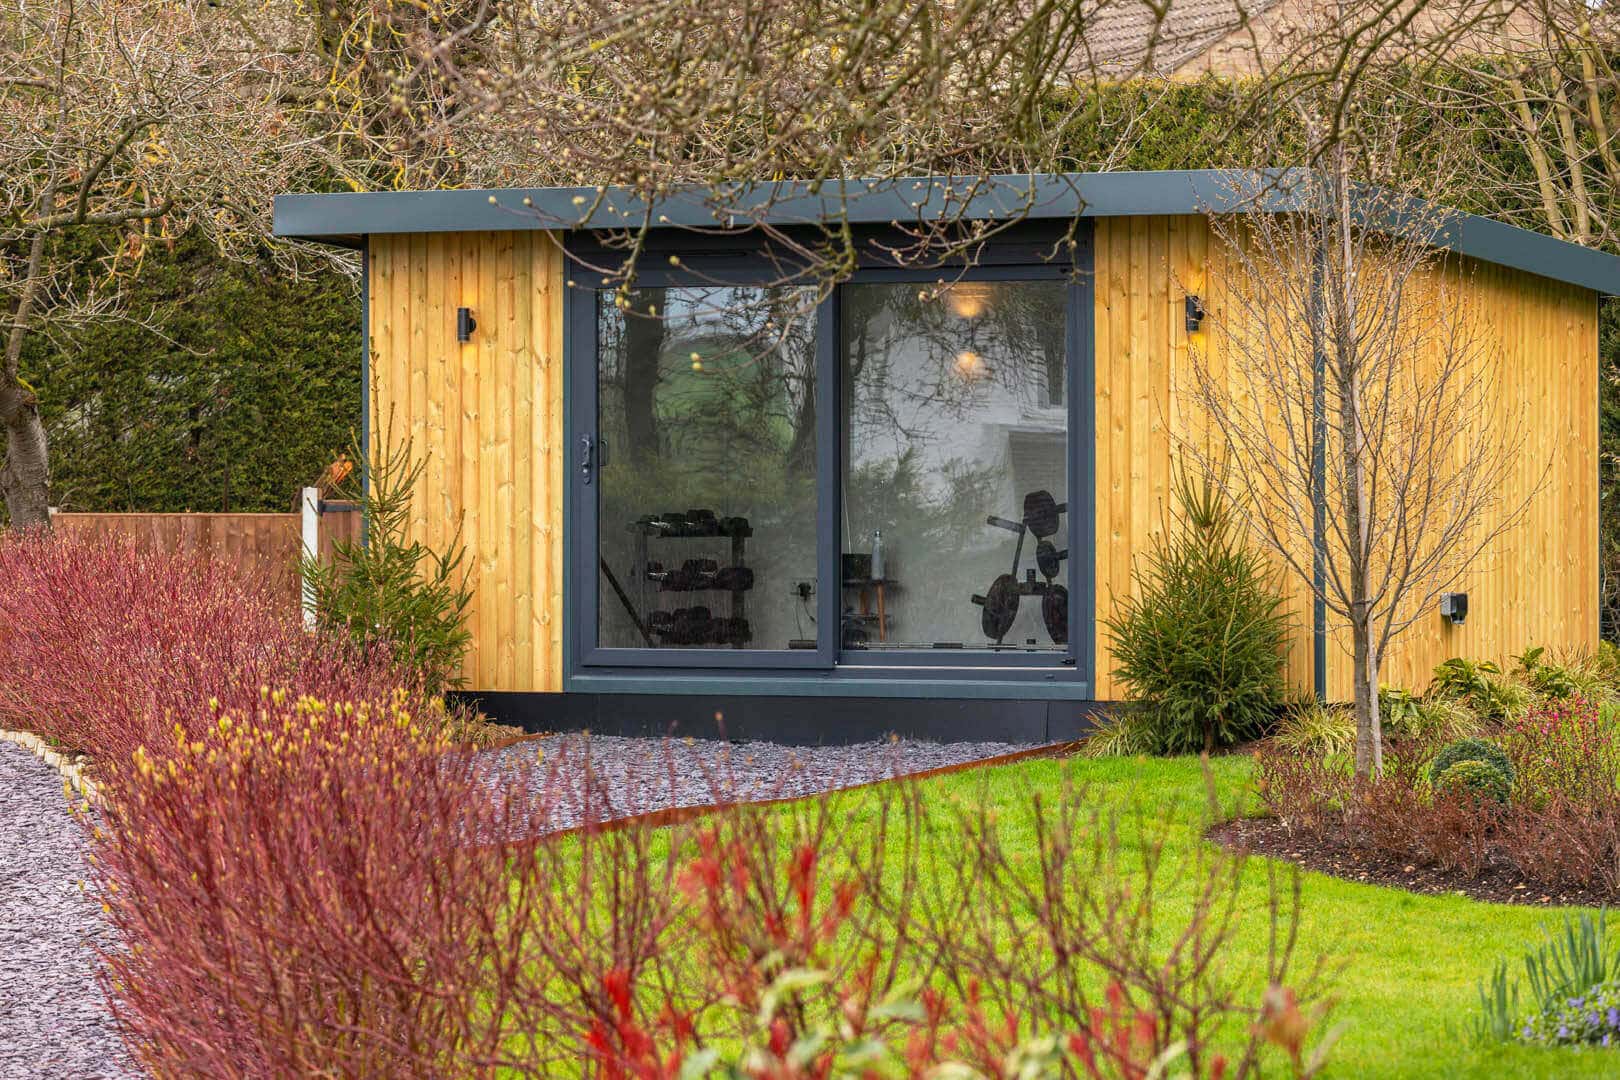 Large garden studio with sliding doors and autumnal shrubs in the foreground.